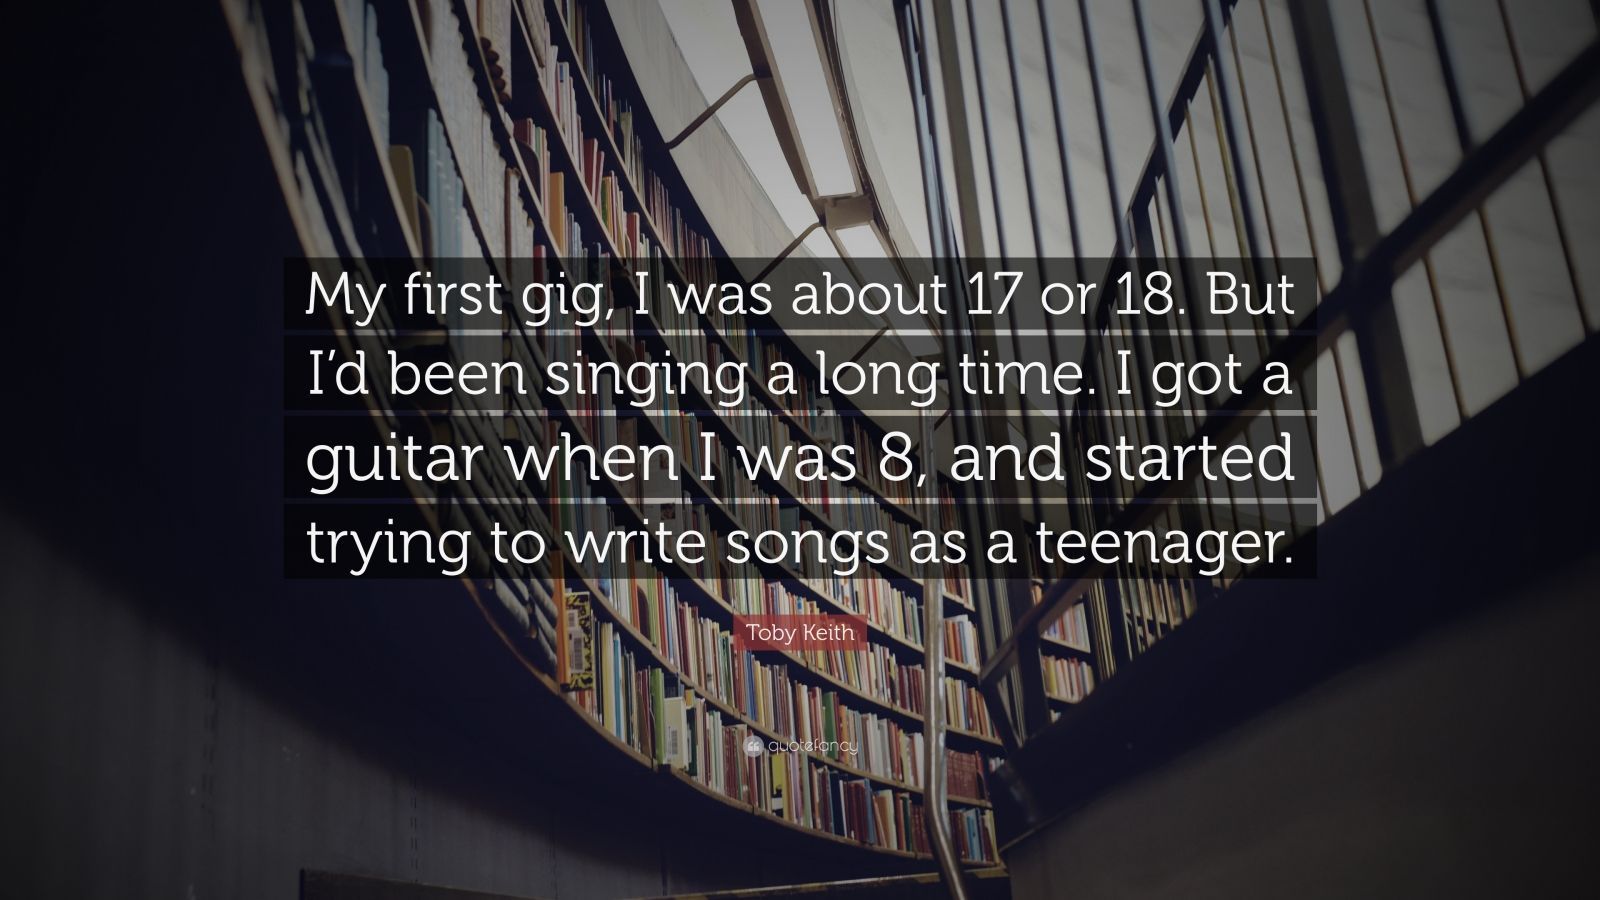 Toby Keith Quote: "My first gig, I was about 17 or 18. But I'd been singing a long time. I got a ...